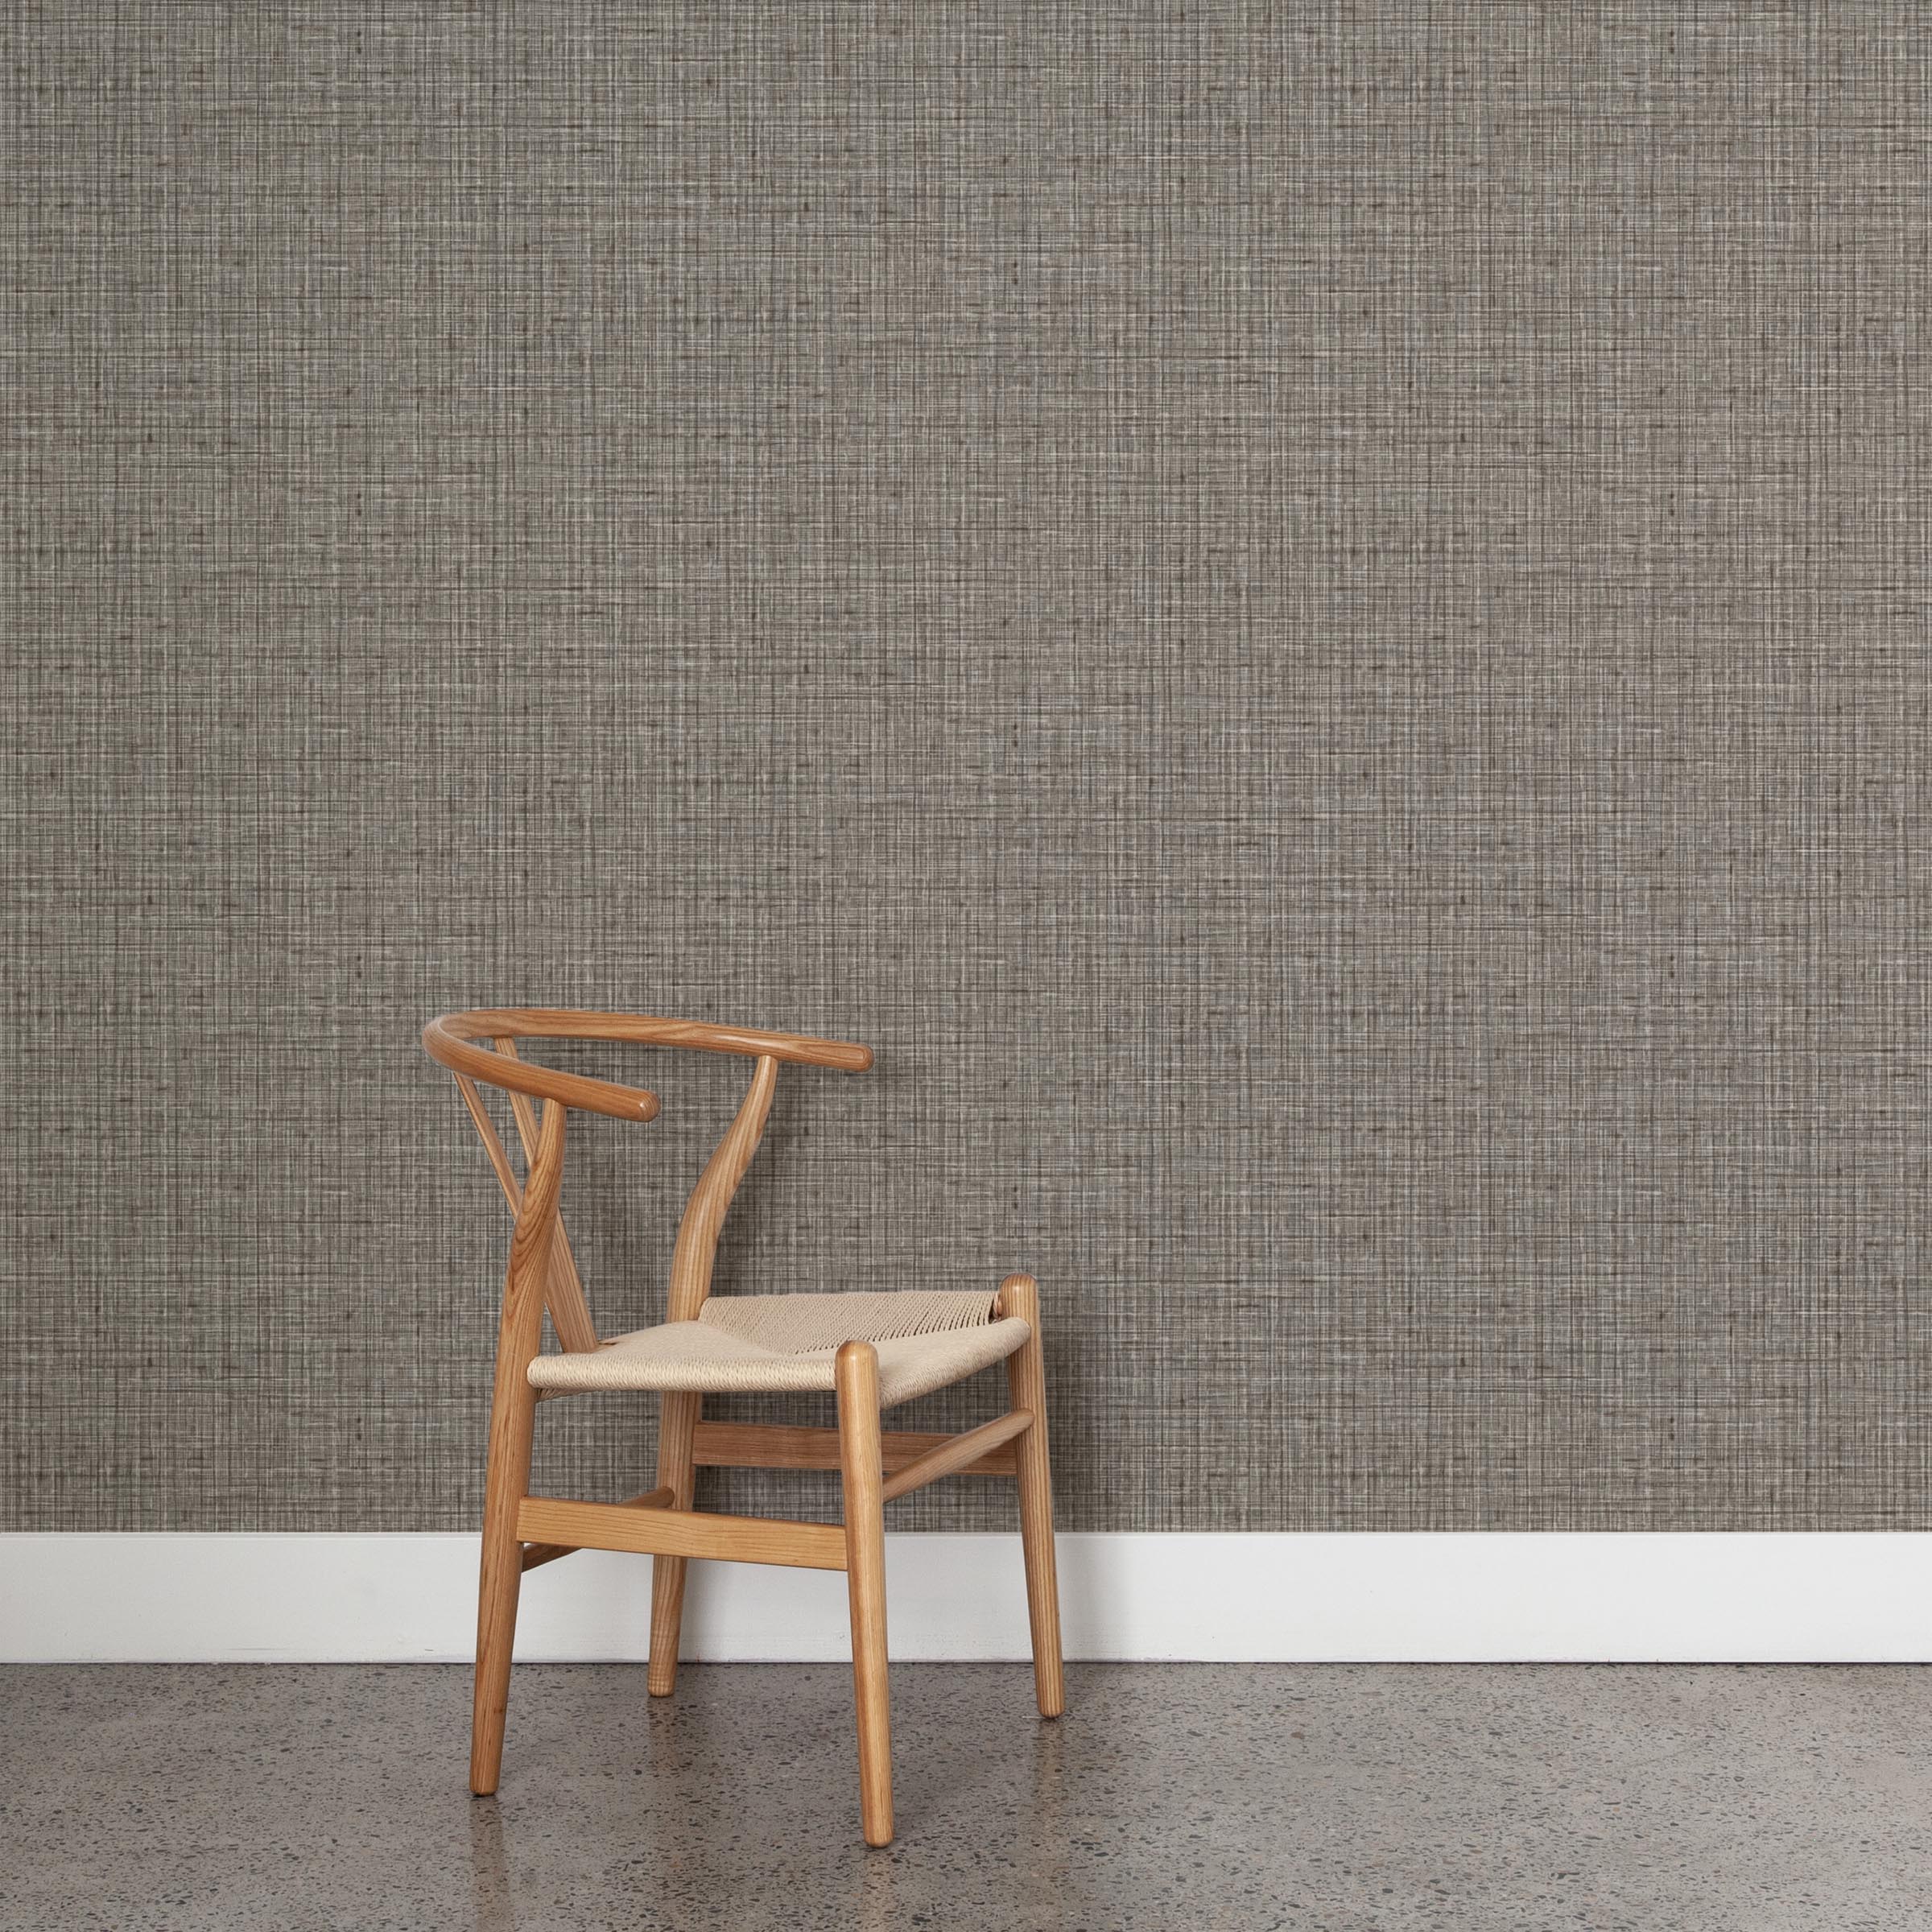 A wooden chair stands in front of a wall papered in a textured tweed pattern in shades of brown and gray.